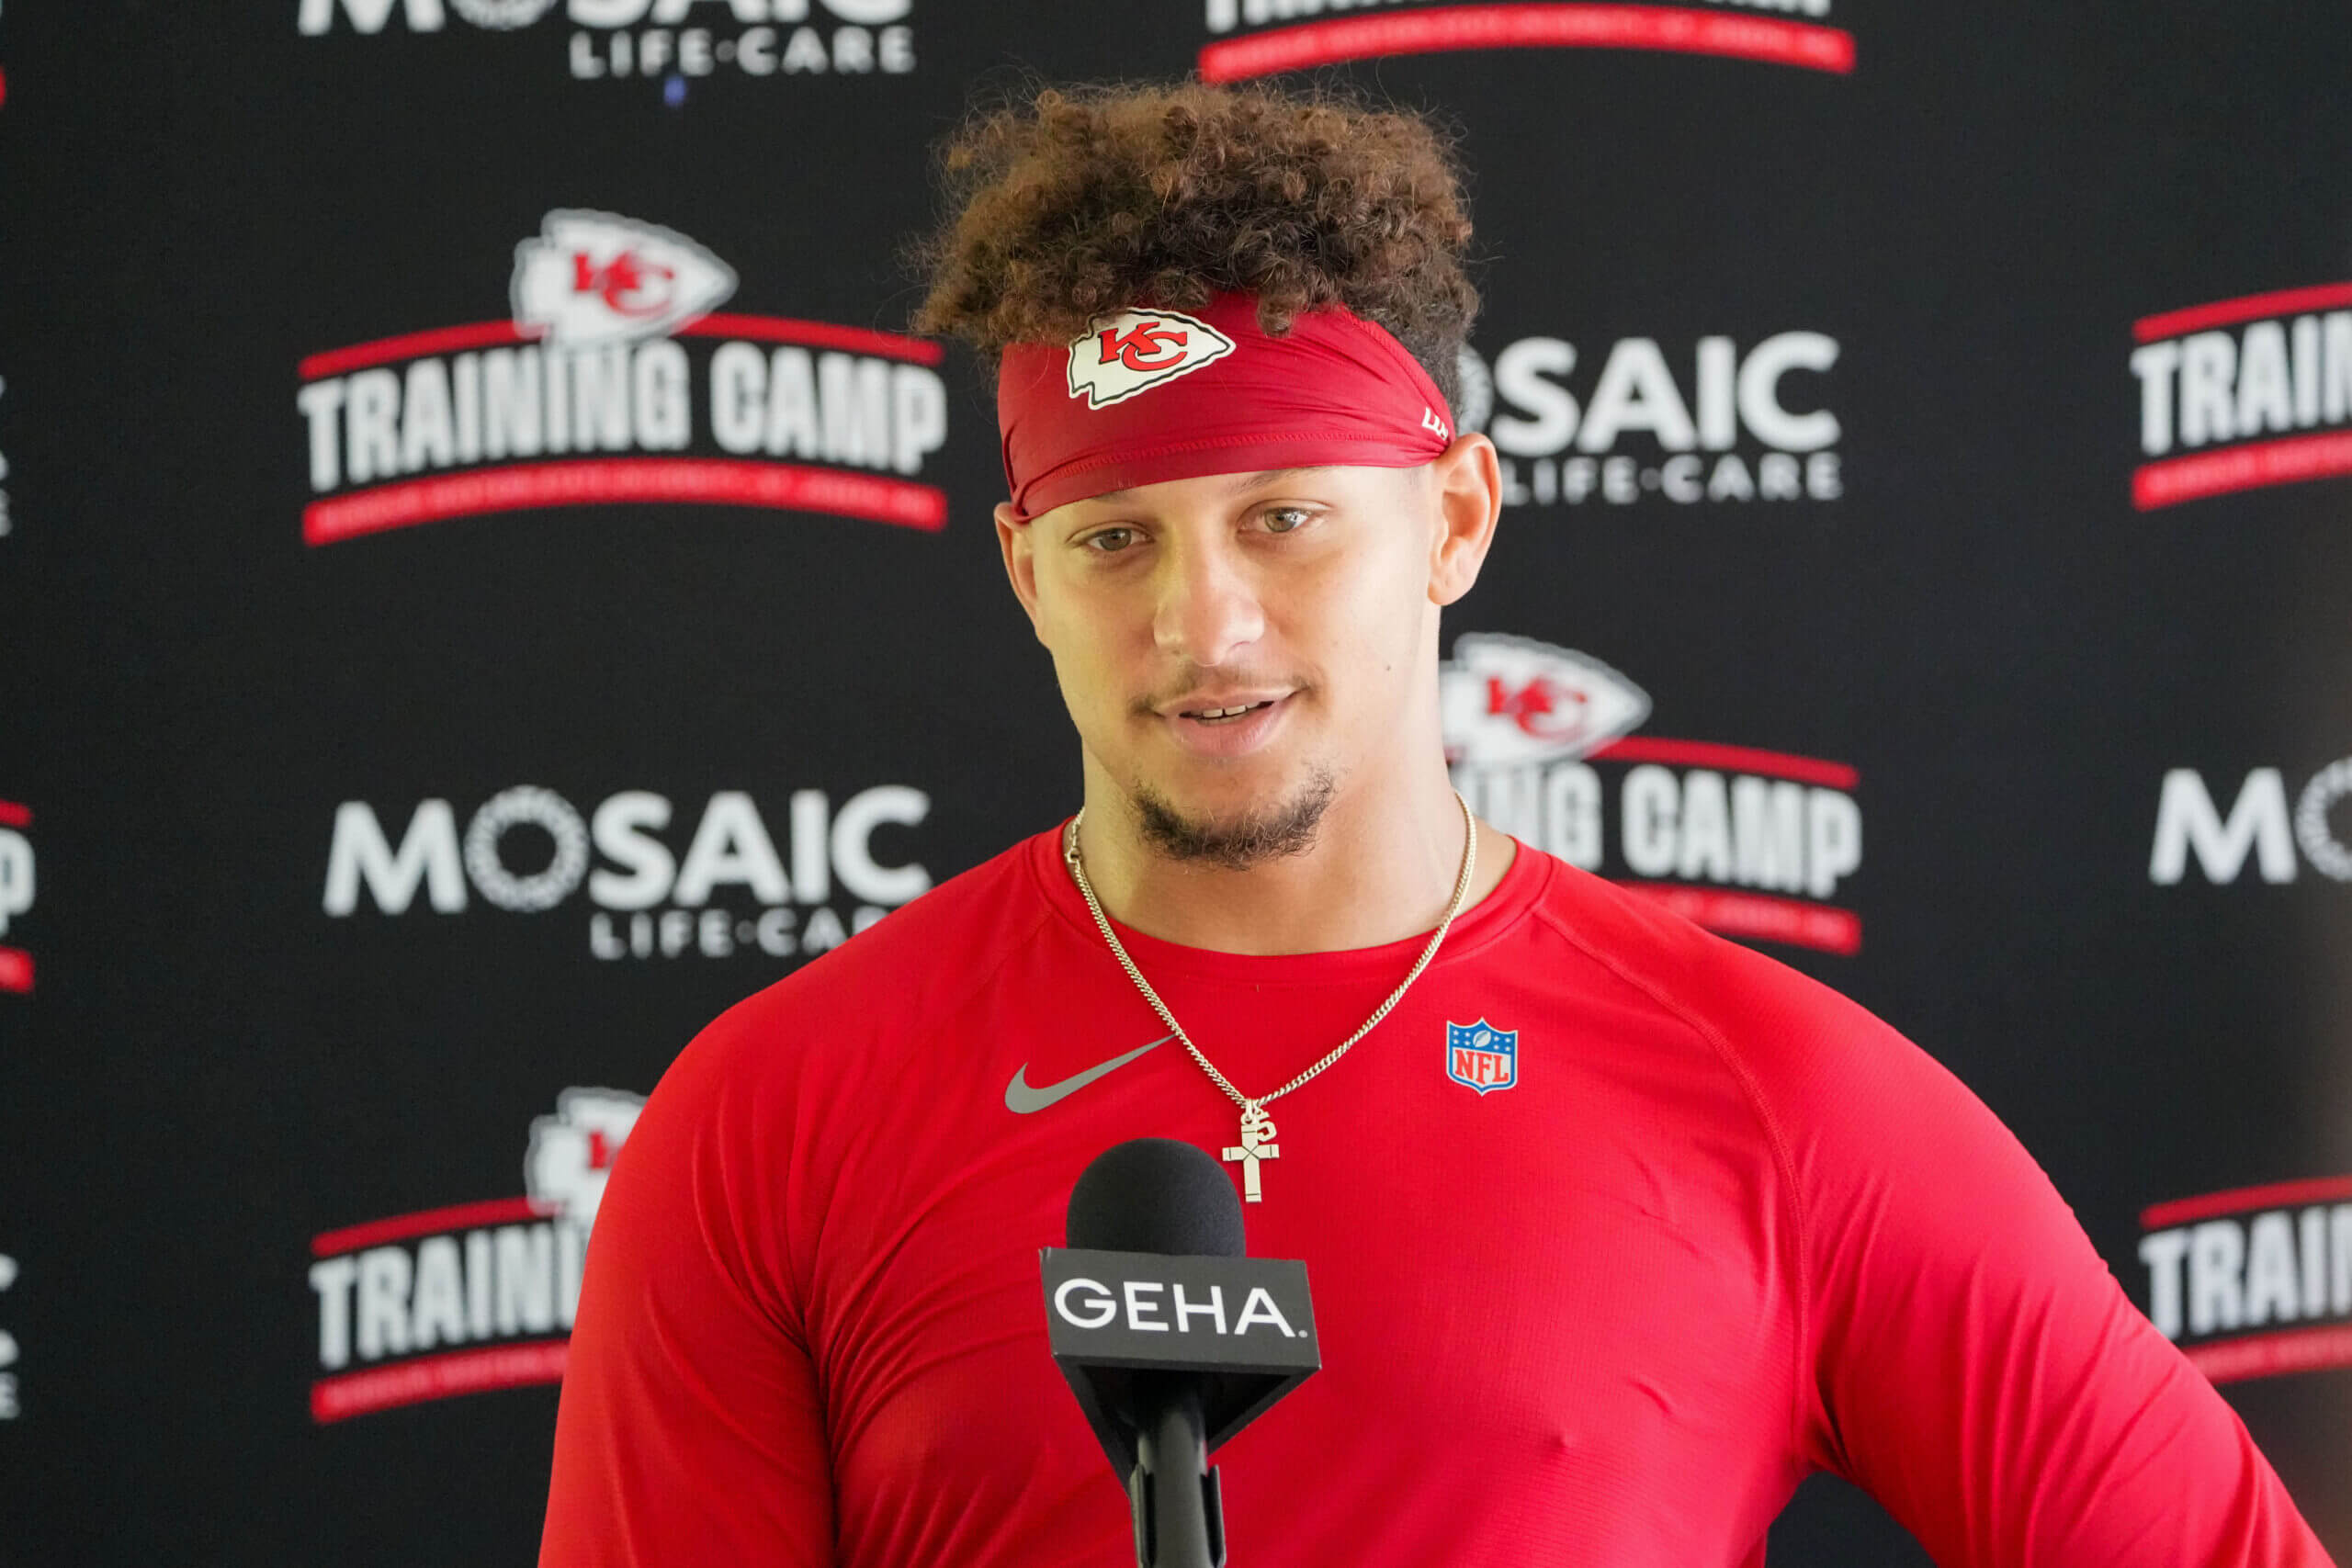 Patrick Mahomes on Raiders' Kermit the Frog incident: 'It’ll get handled when it gets handled'